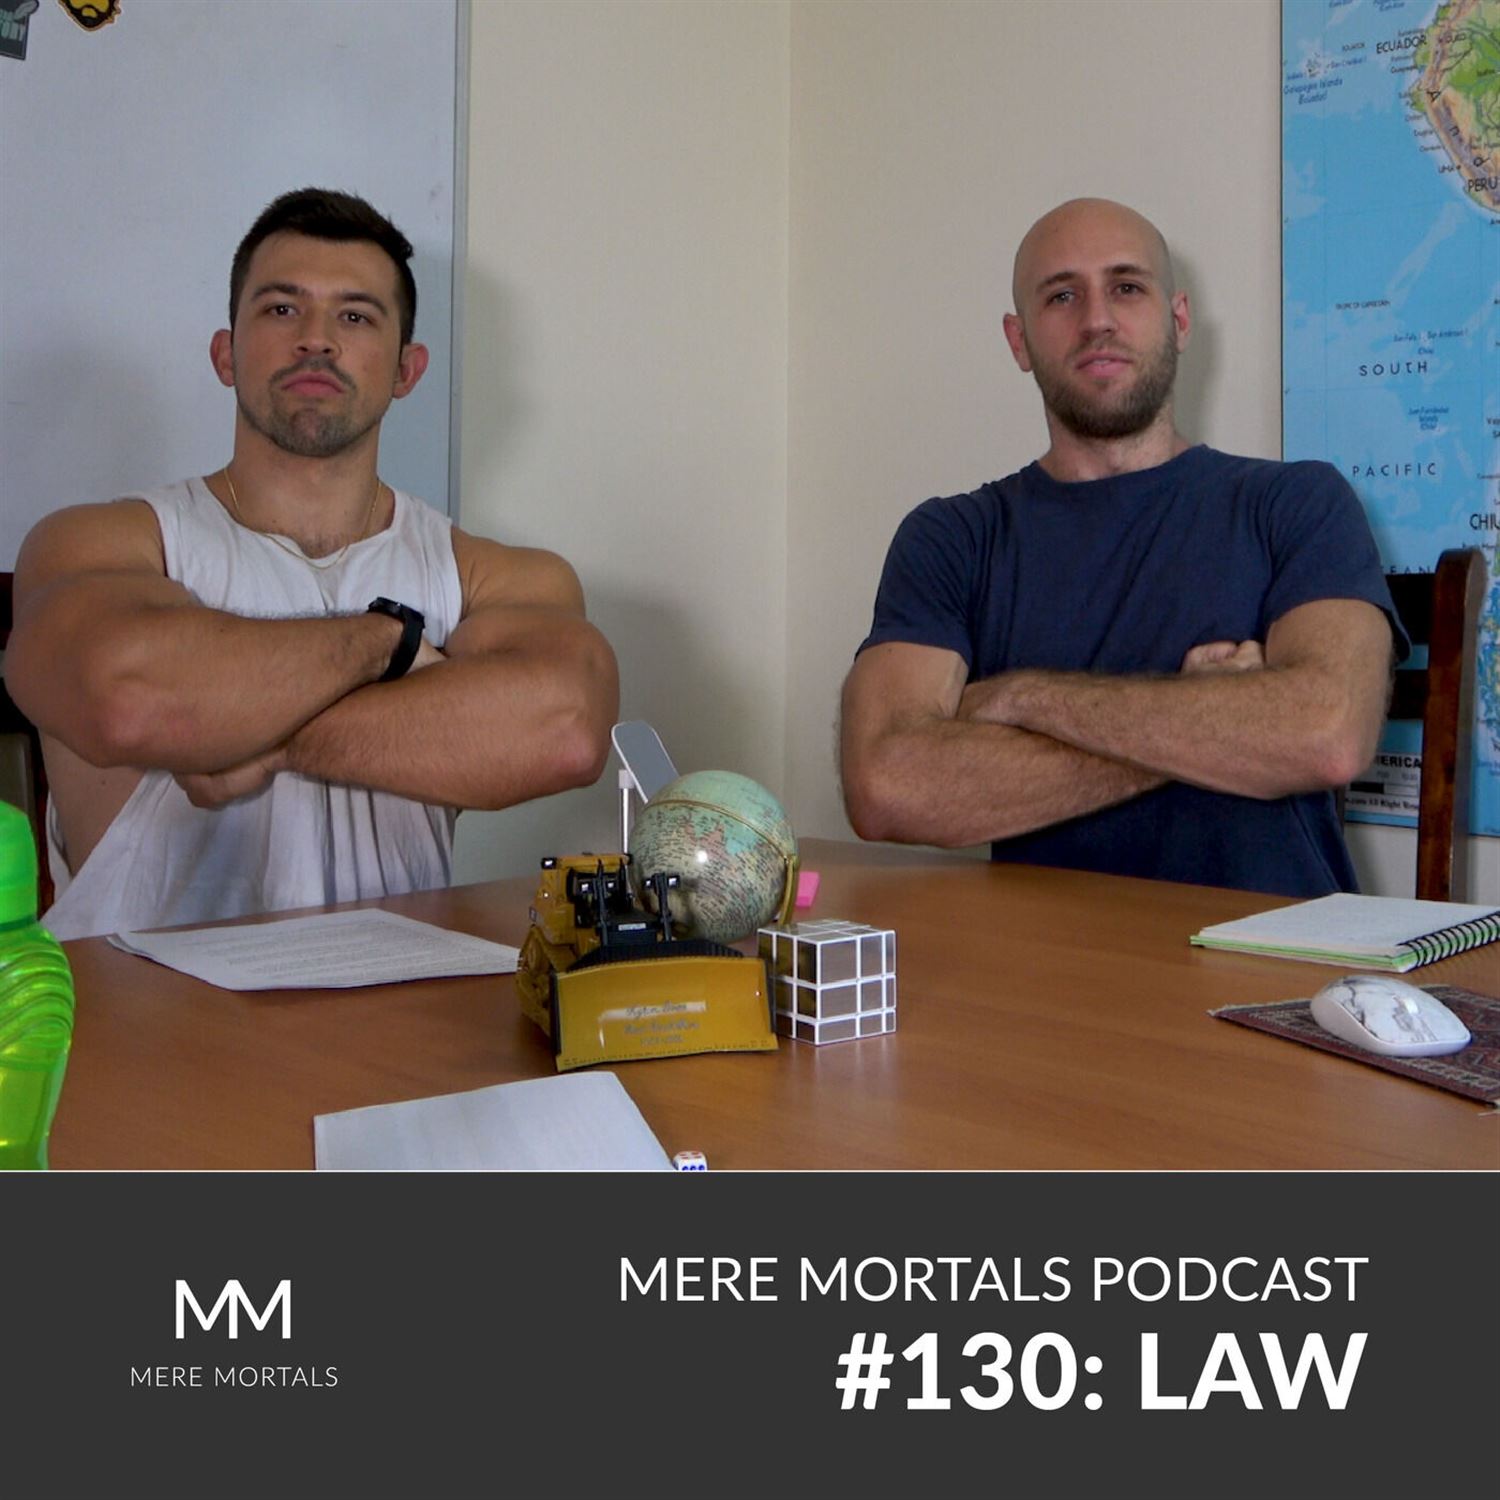 Reading Law Is Boring!! (Episode #130 - Law)